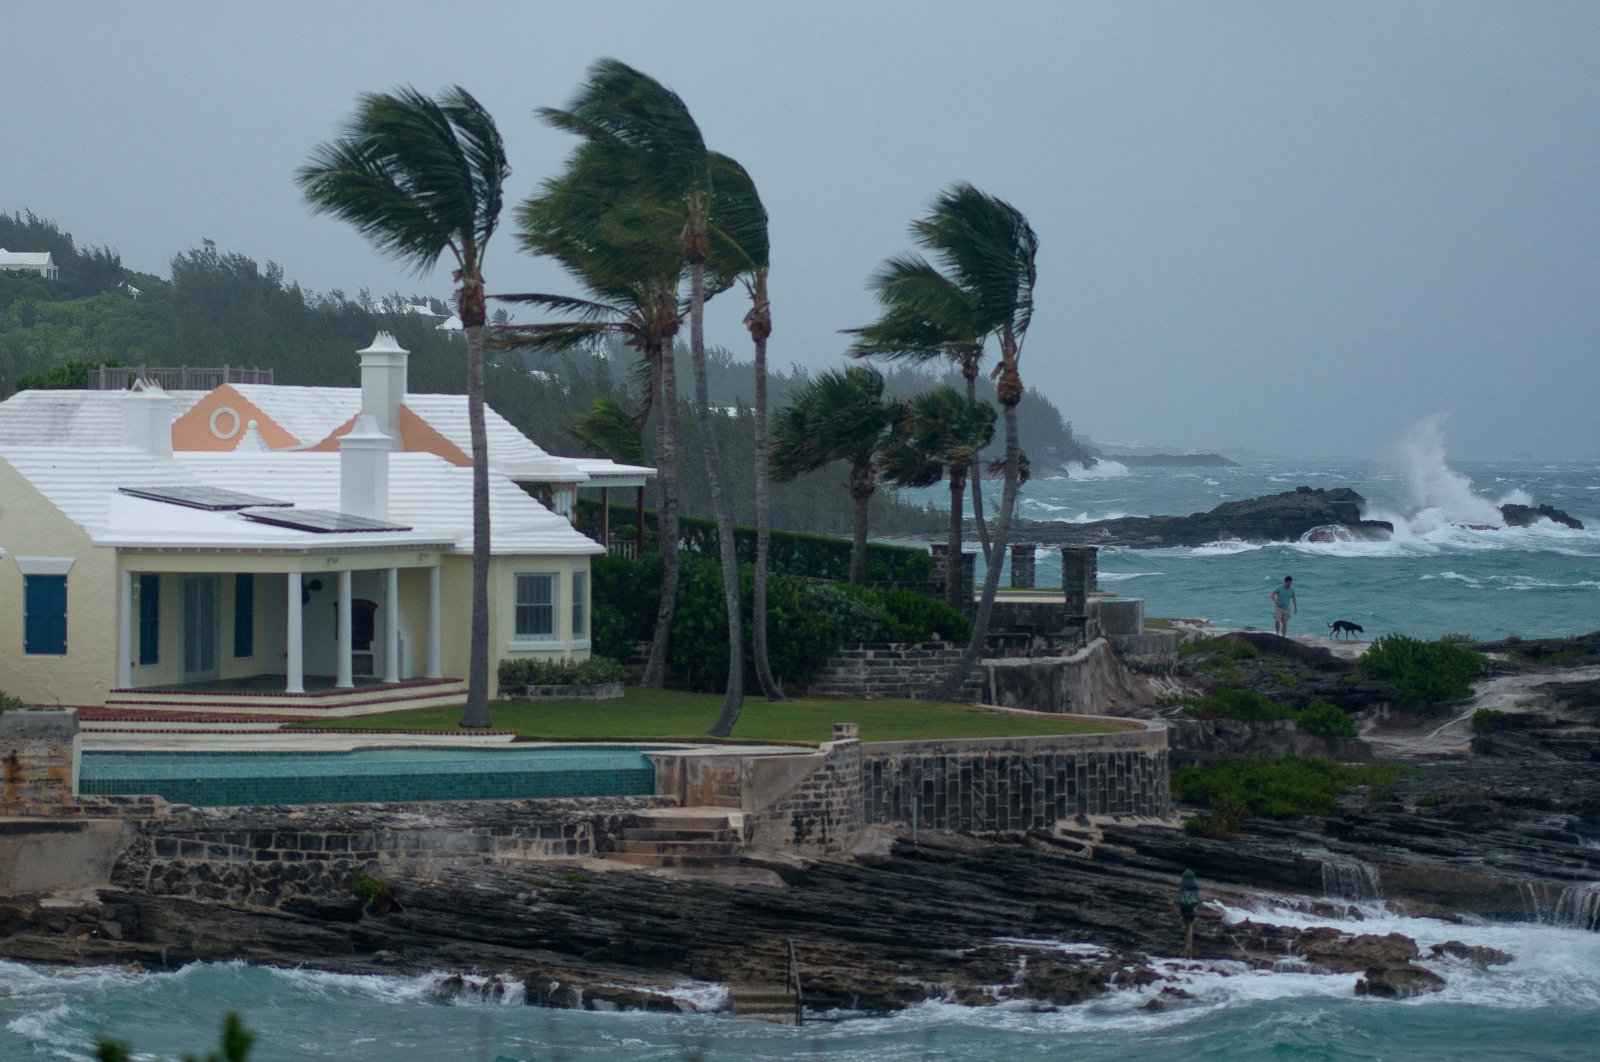 Increasing wind pushes waves toward the south shore before the arrival of Hurricane Fiona, Bermuda, Sept. 22, 2022. (Reuters Photo)